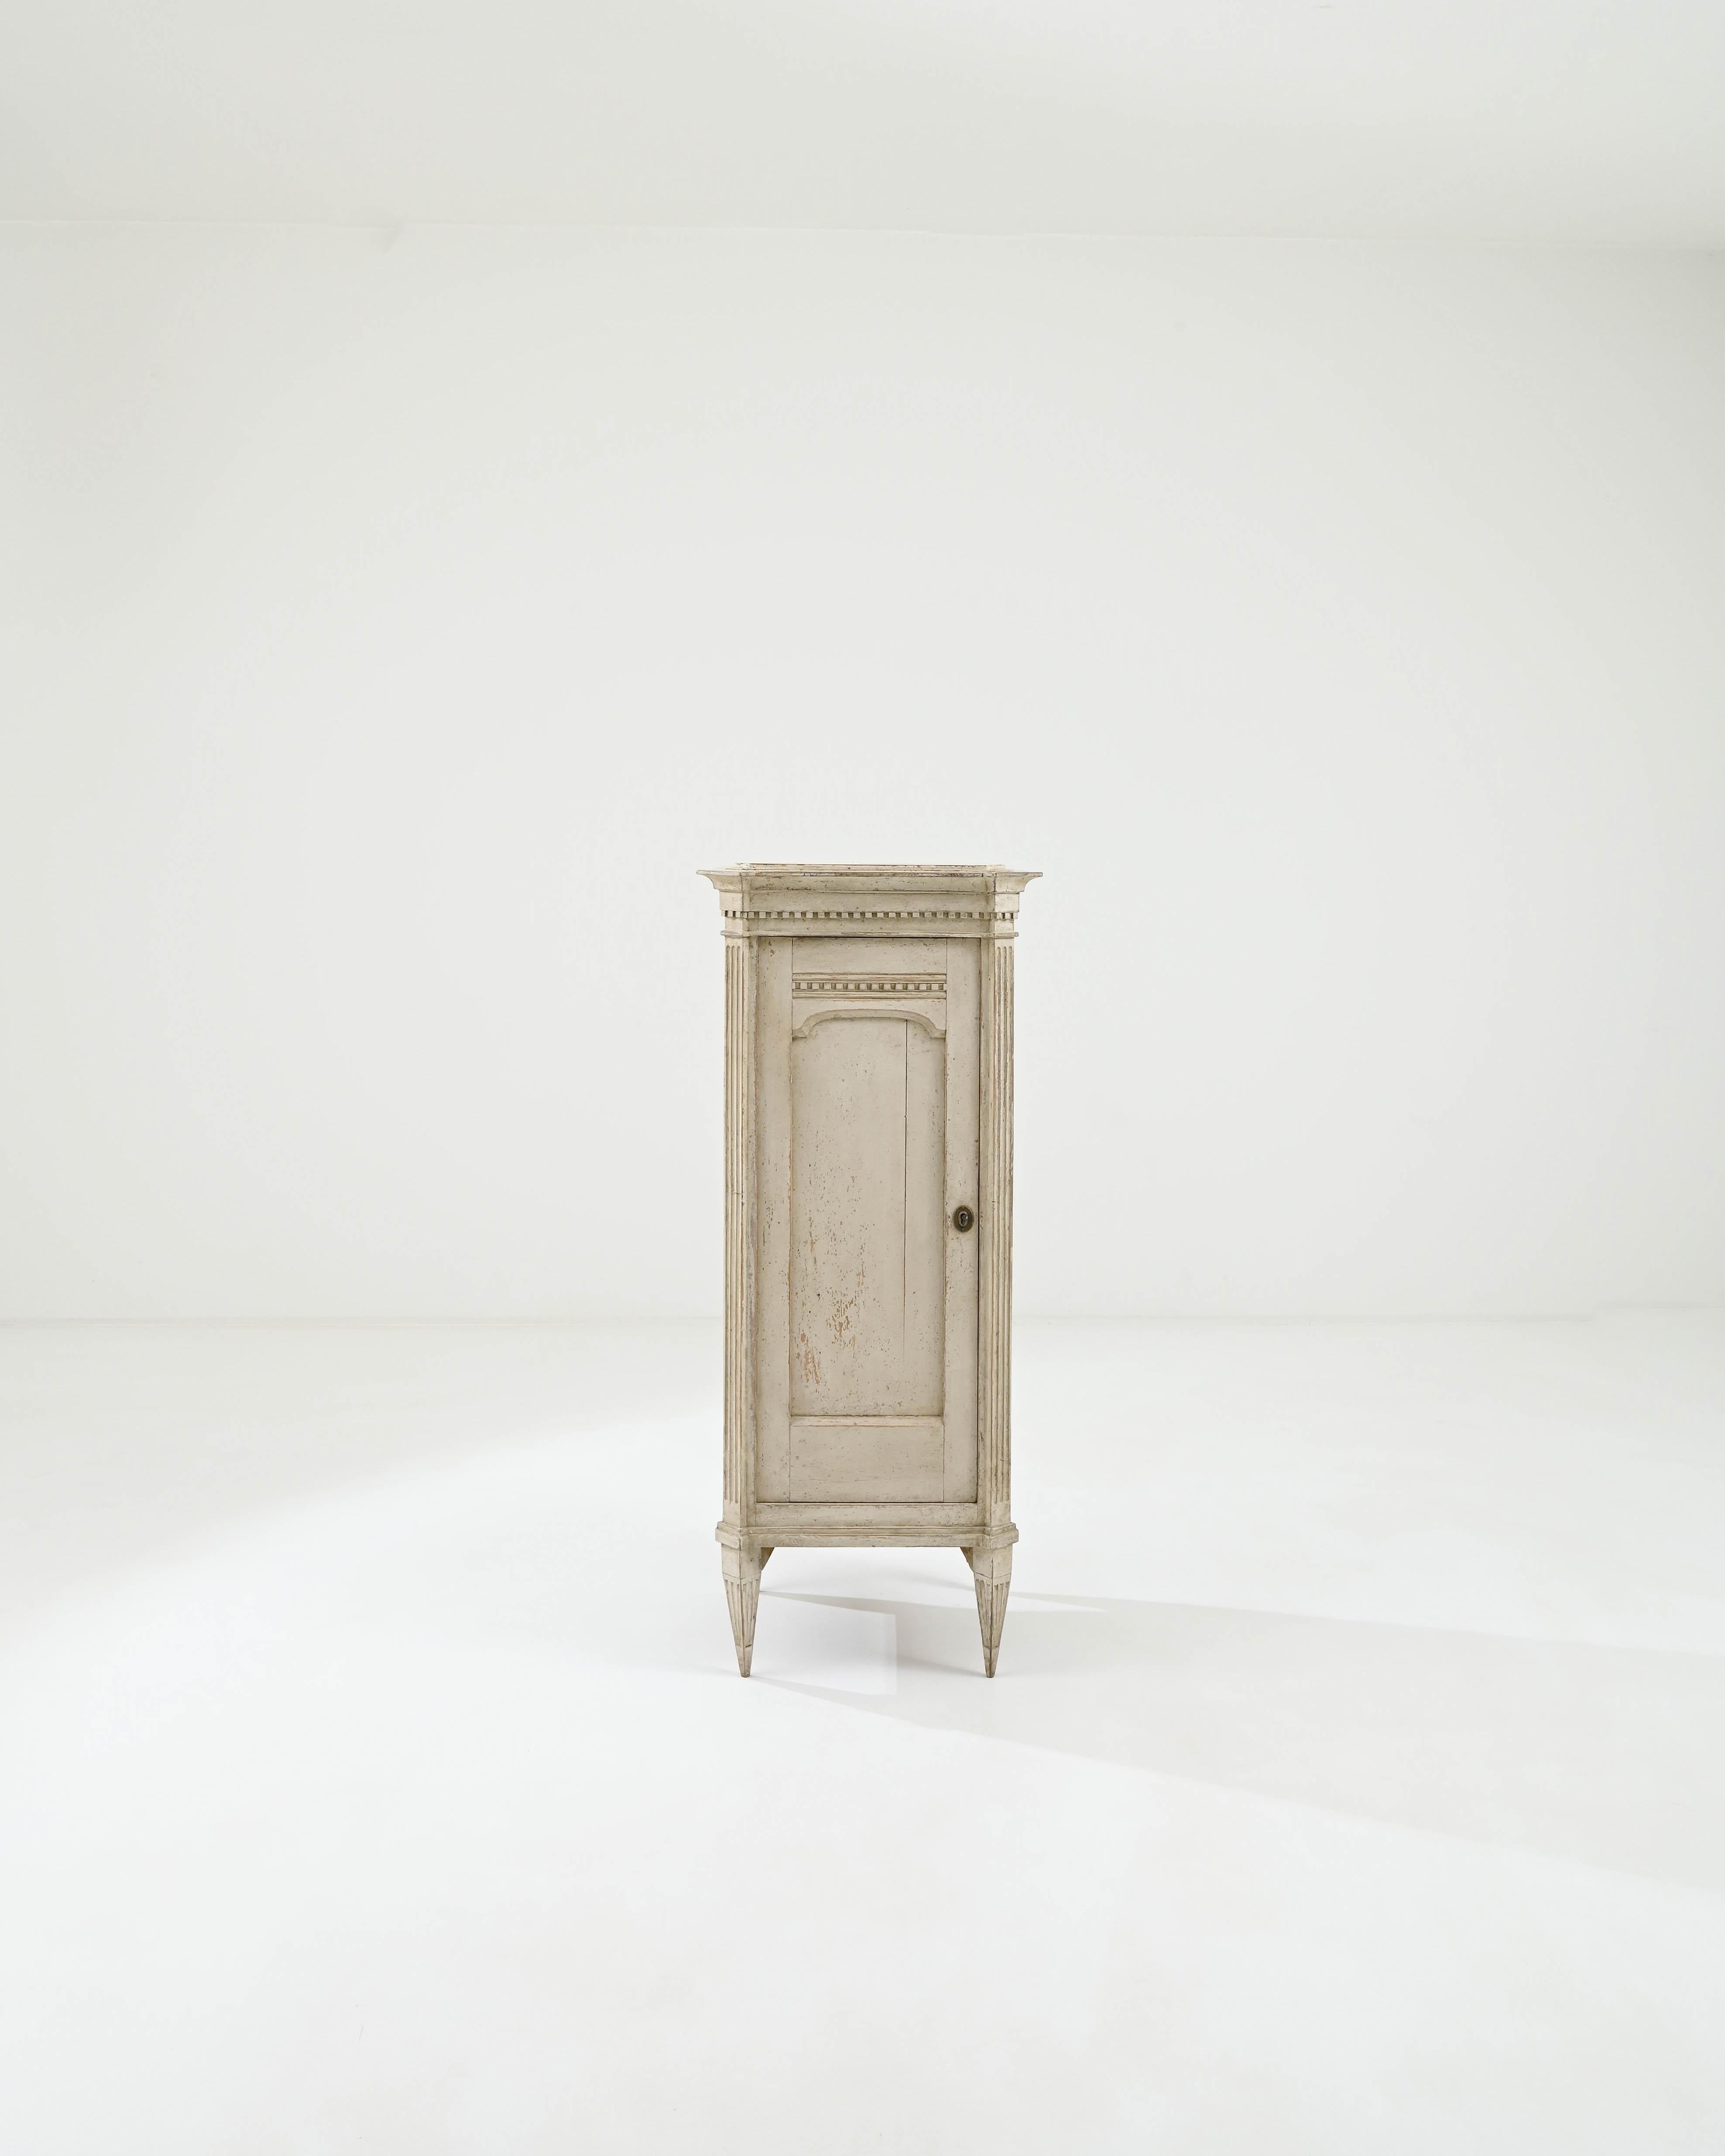 This vintage wooden cabinet embodies the subdued elegance of Gustavian style. Built in Scandinavia at the turn of the century, delicate Neoclassical elements give the case an air of refinement. The slender silhouette is emphasized by fluted columns;